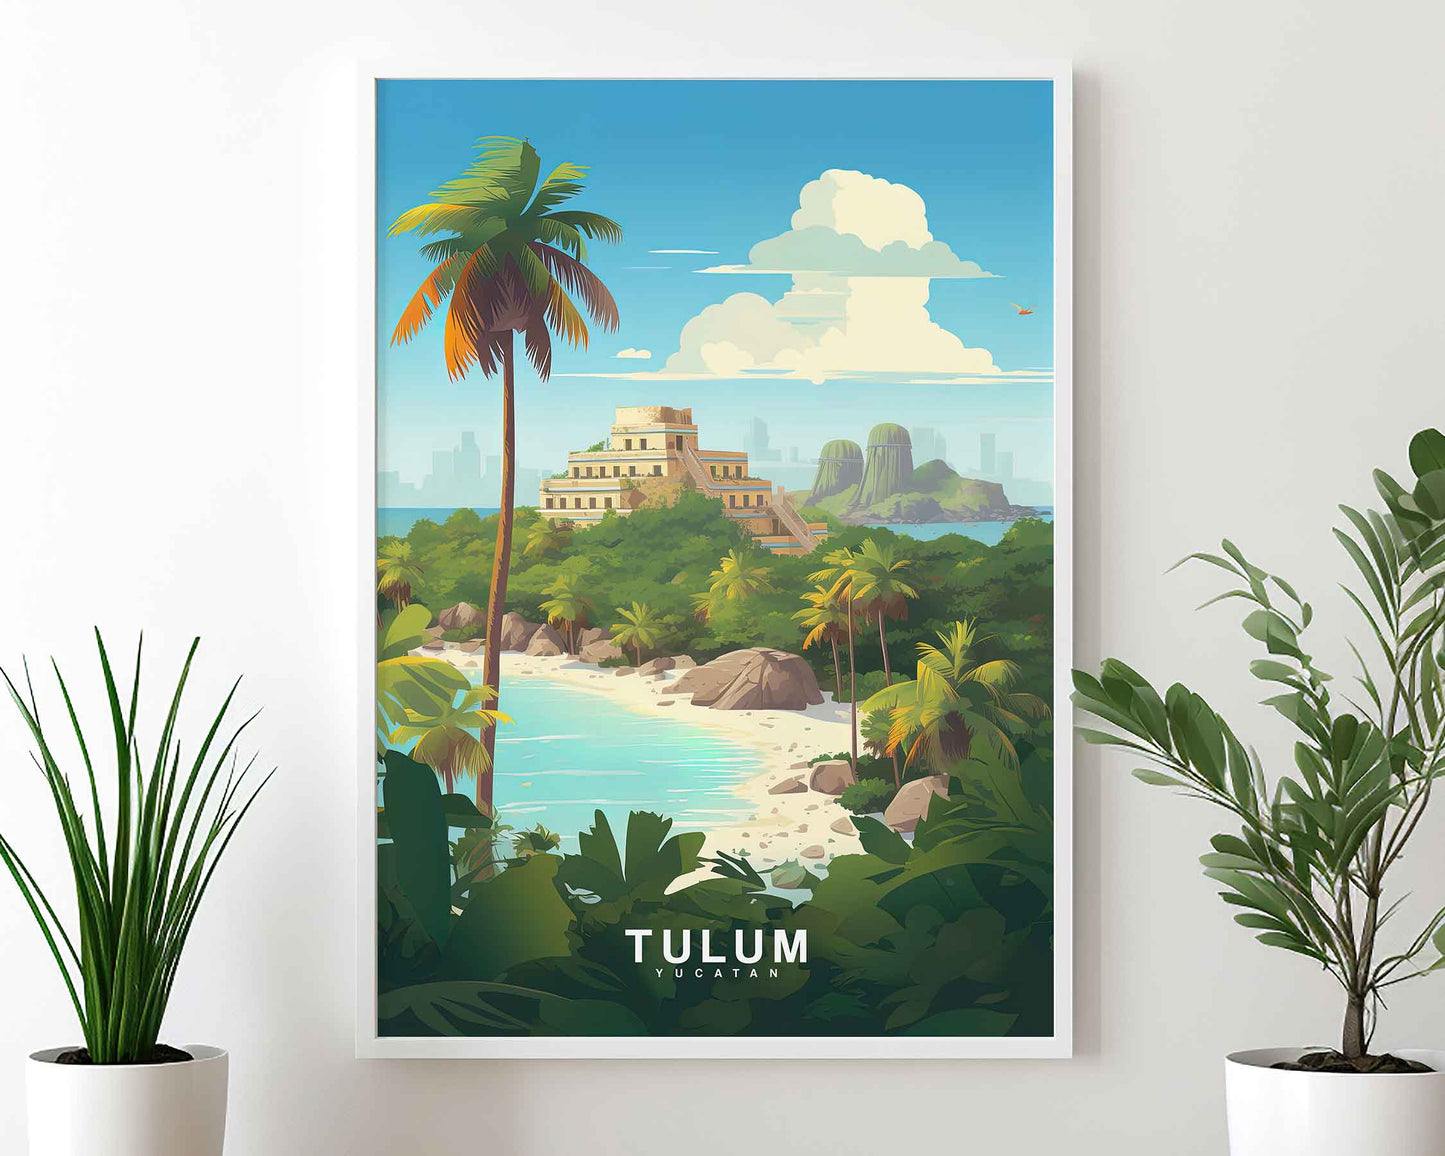 Framed Image of Tulum Travel Poster Tourism Wall Art Print, Mexico Illustration